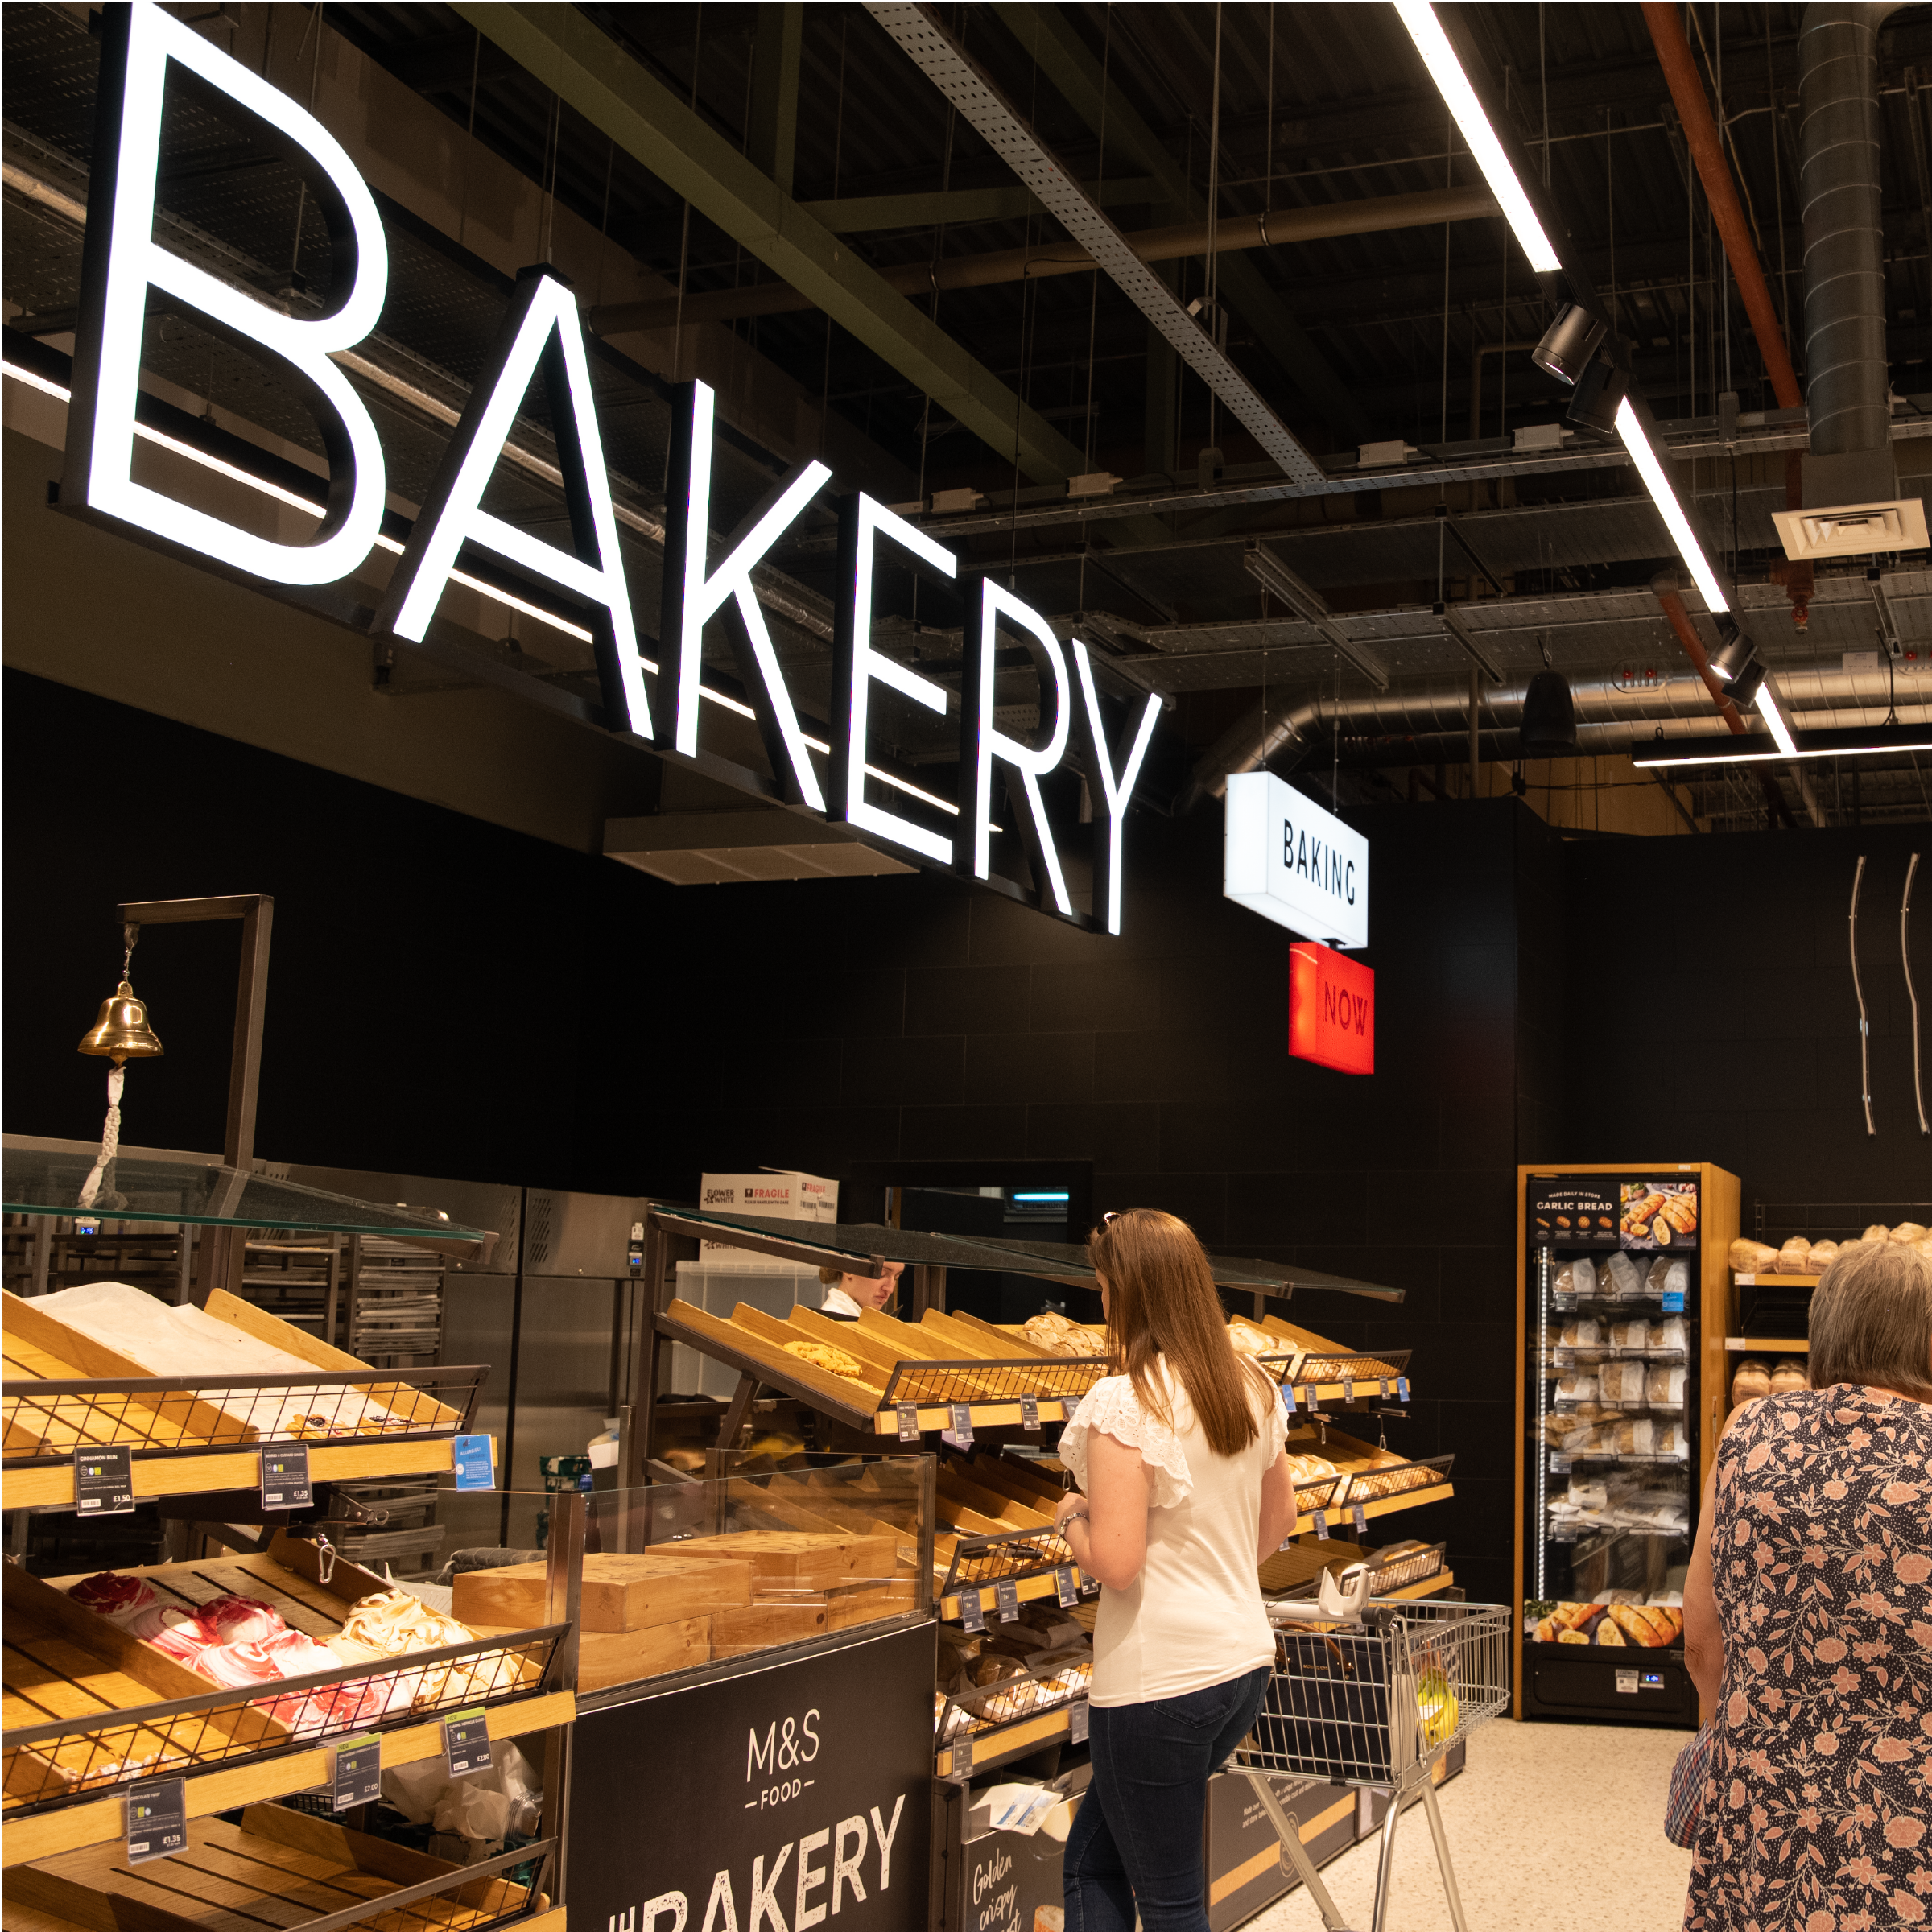 Fresh Bakery at M&S Sprucefield